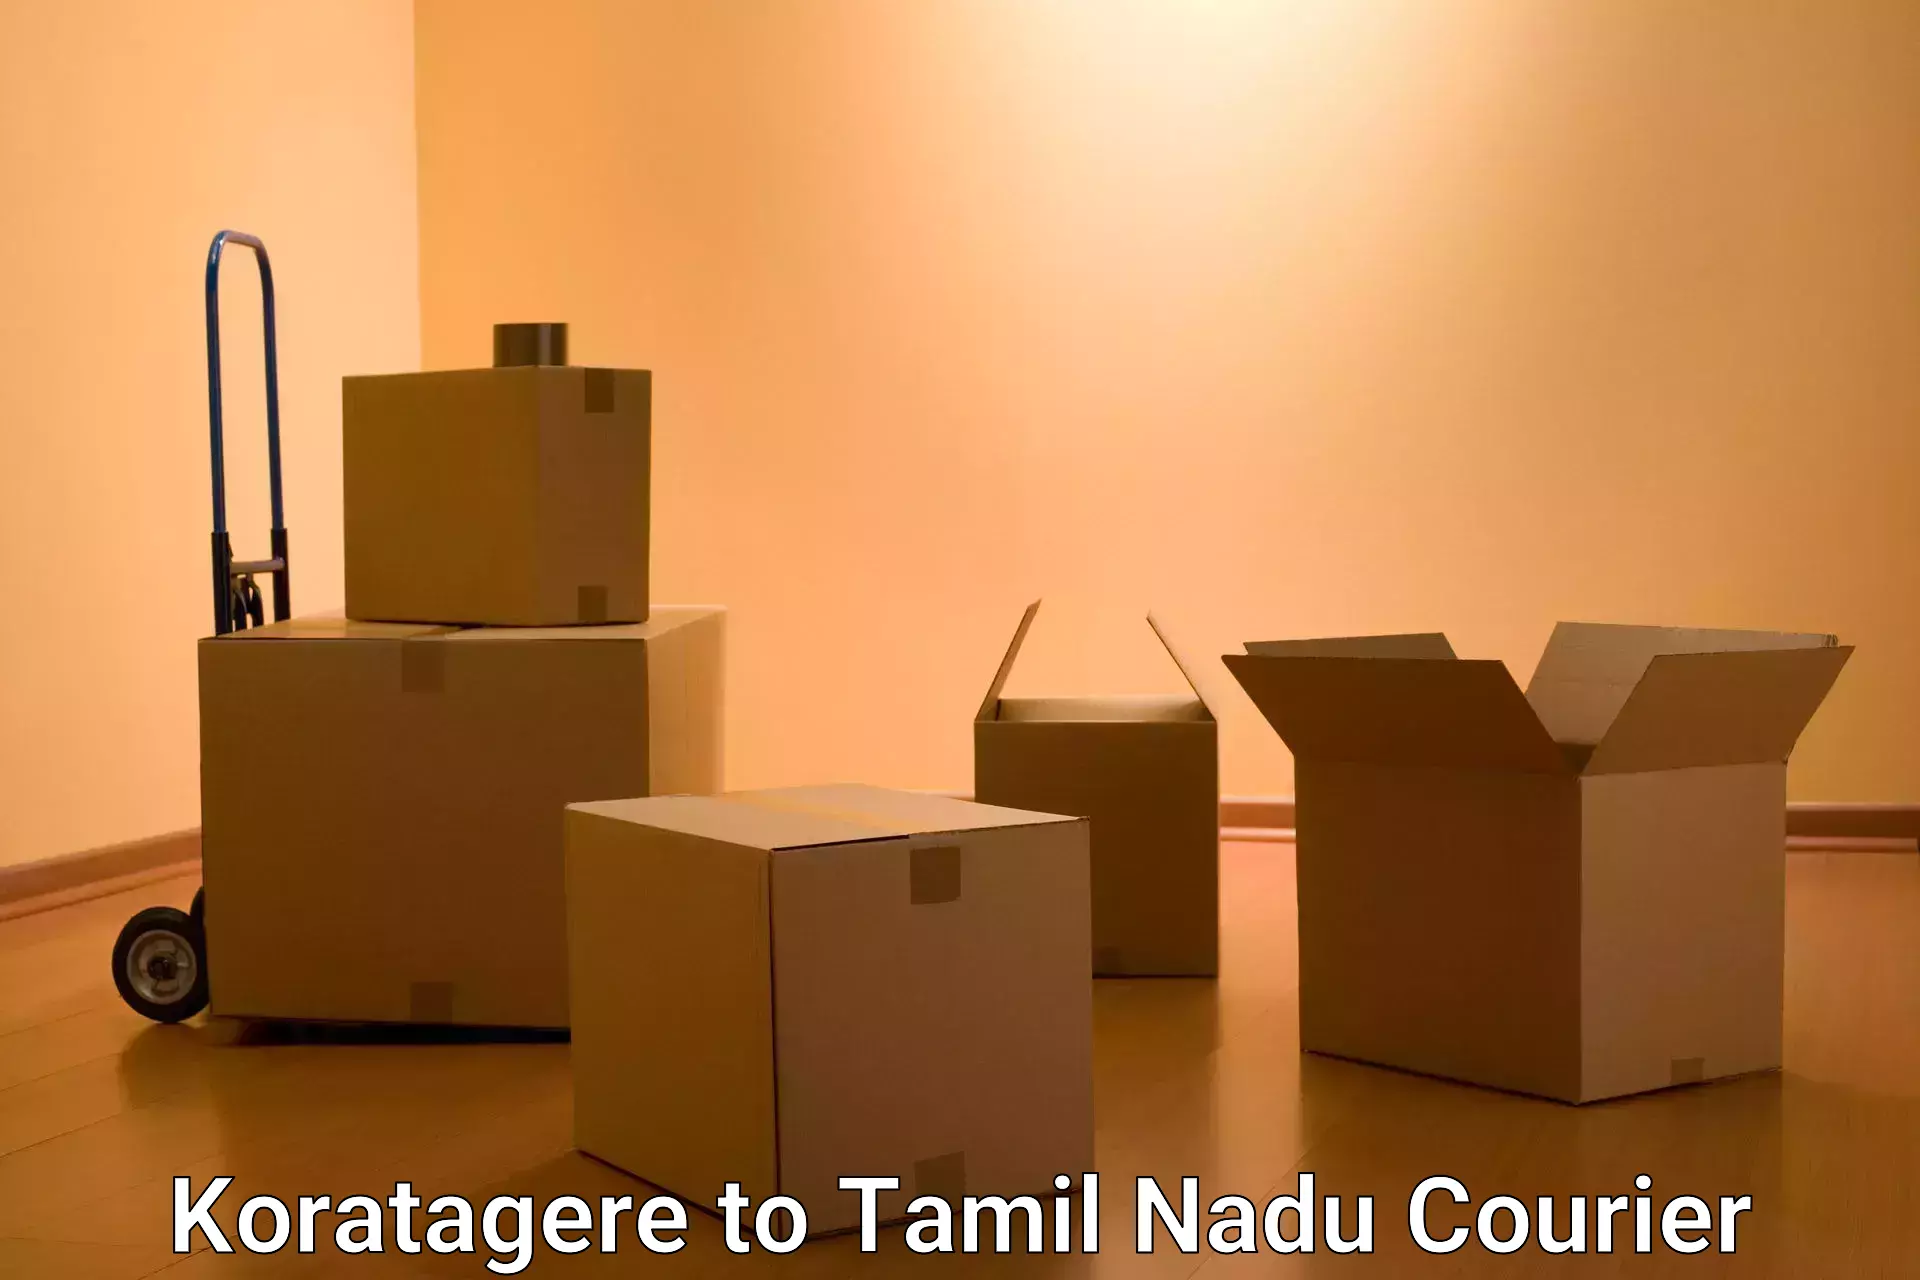 Package delivery network Koratagere to Rathinasabapathy Puram